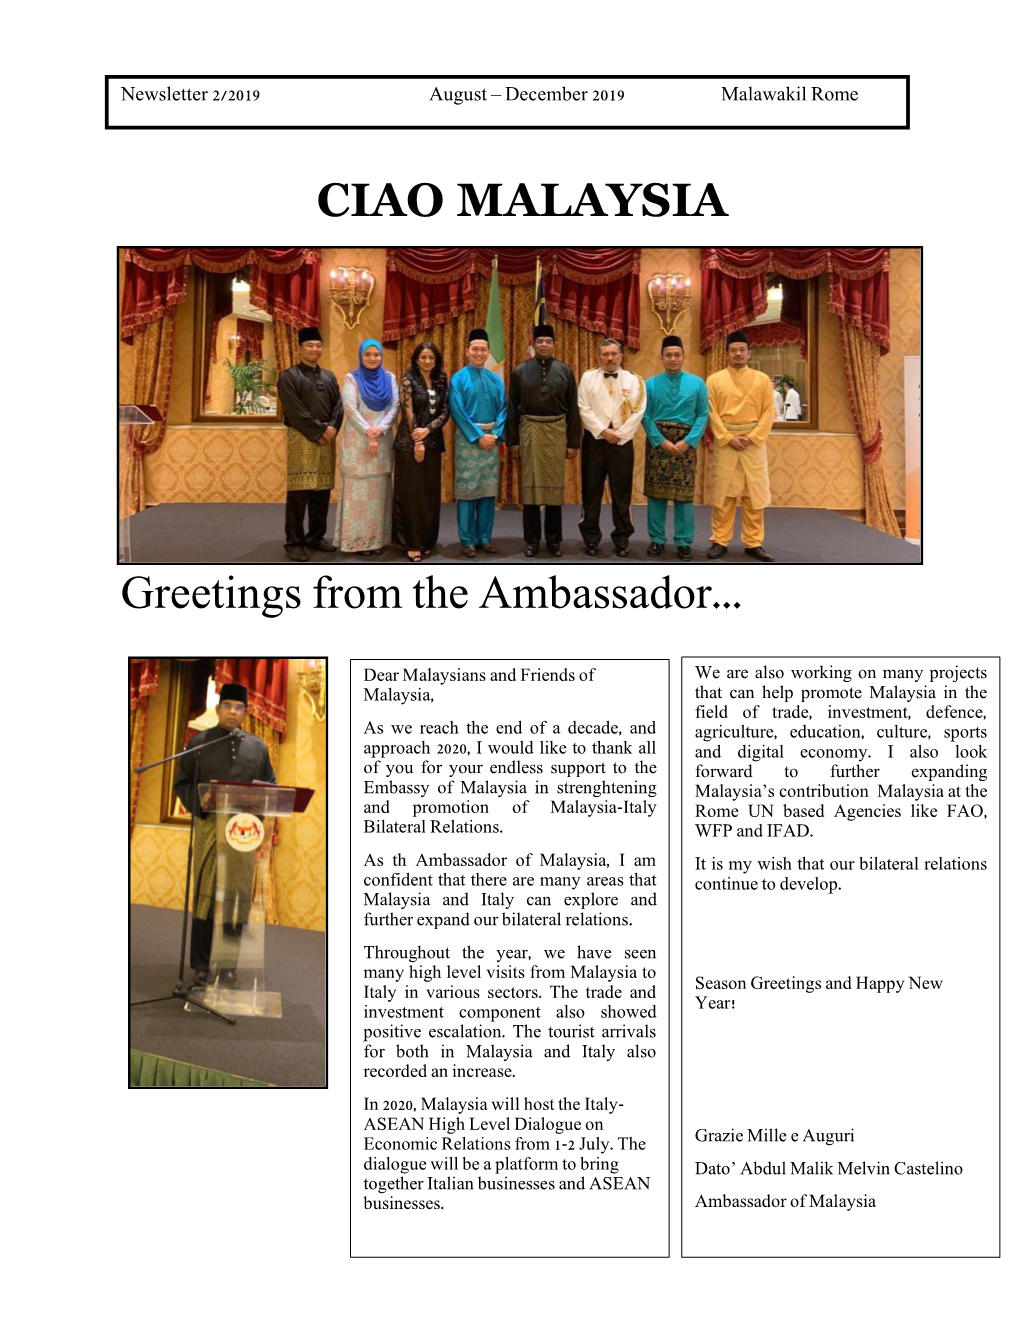 CIAO MALAYSIA Greetings from the Ambassador